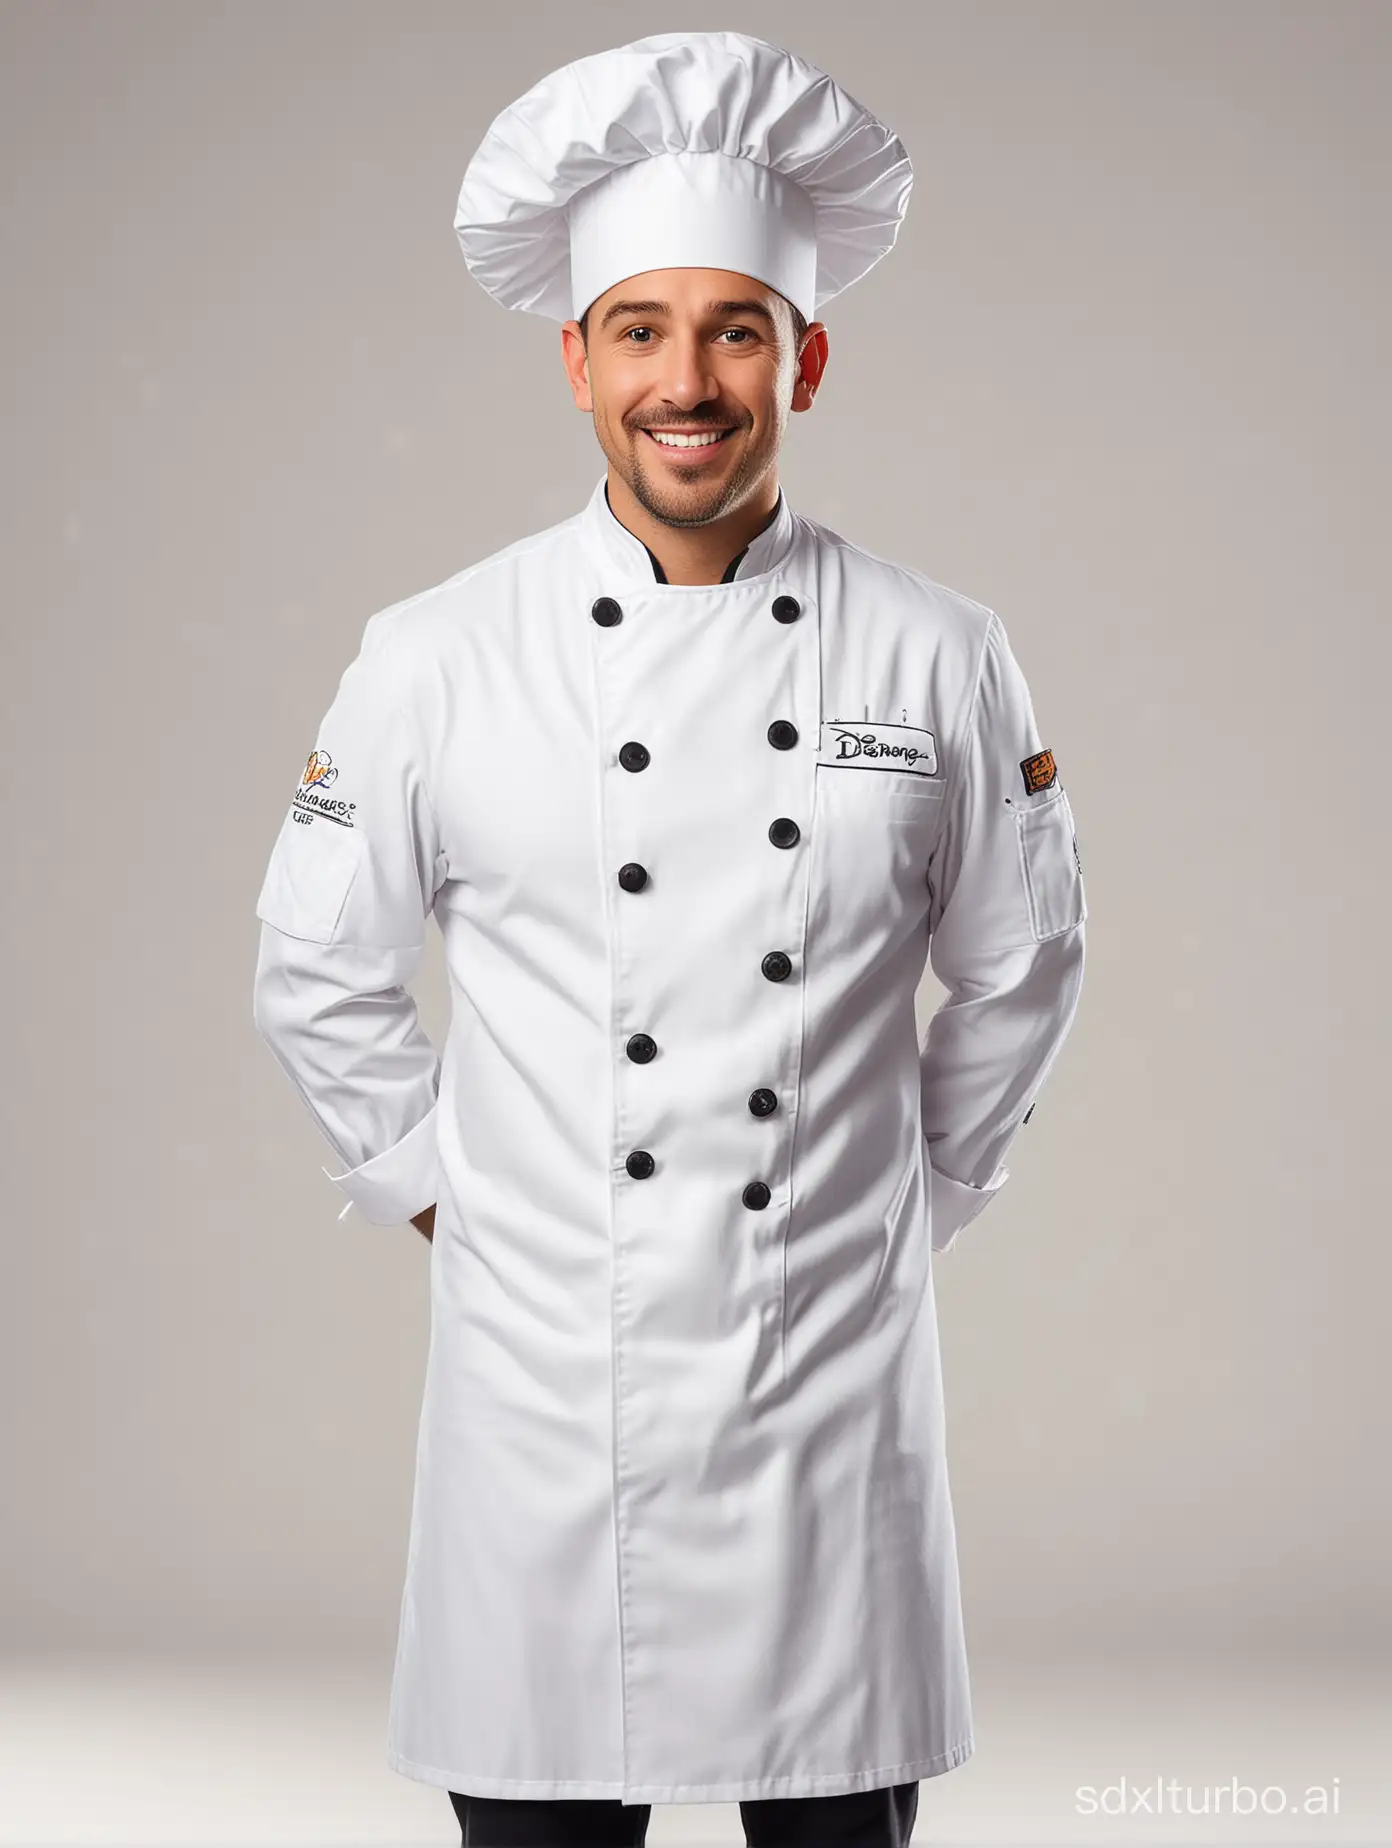 A chef presented in Disney style, wearing a professional chef's uniform, standing in front of a bright white background. His appearance is vivid, showing a Disney-like cartoon image. The chef wears a neat chef's uniform and sports an iconic chef's hat.